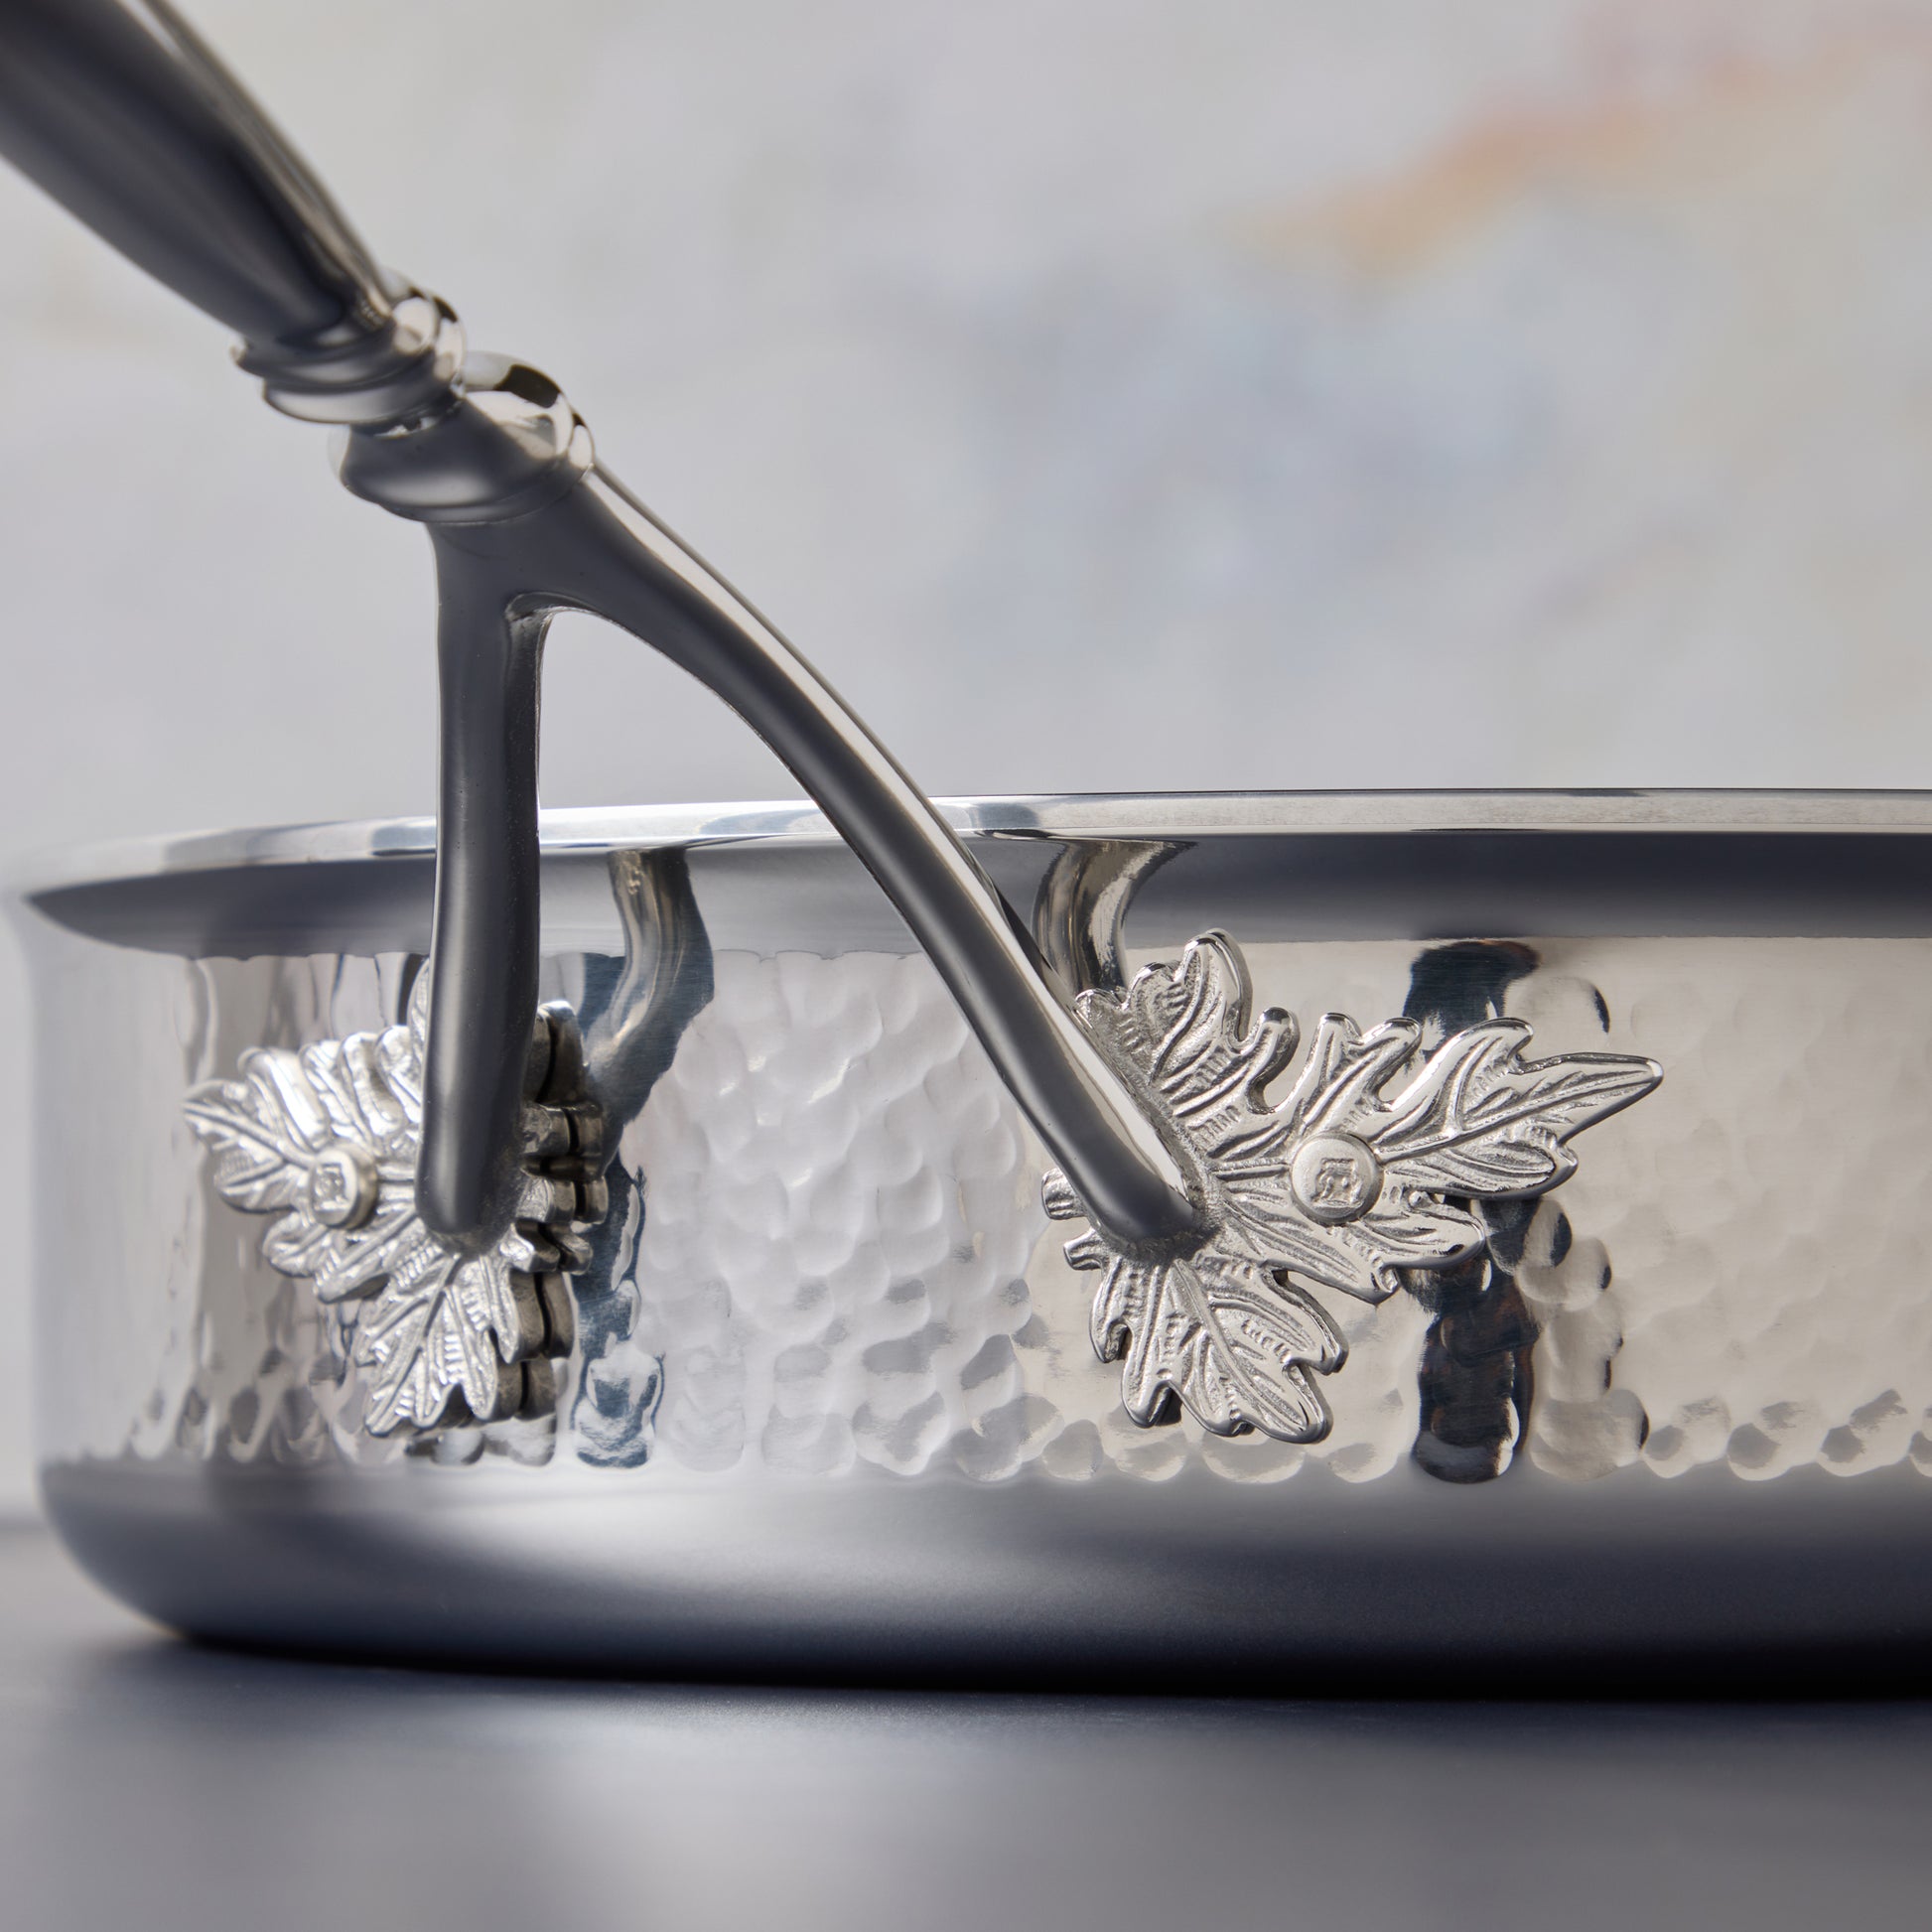 Ruffoni Opus Prima Sauté Pan 3.5qt crafted in hammered stainless steel and decorated with Ruffoni iconic motifs